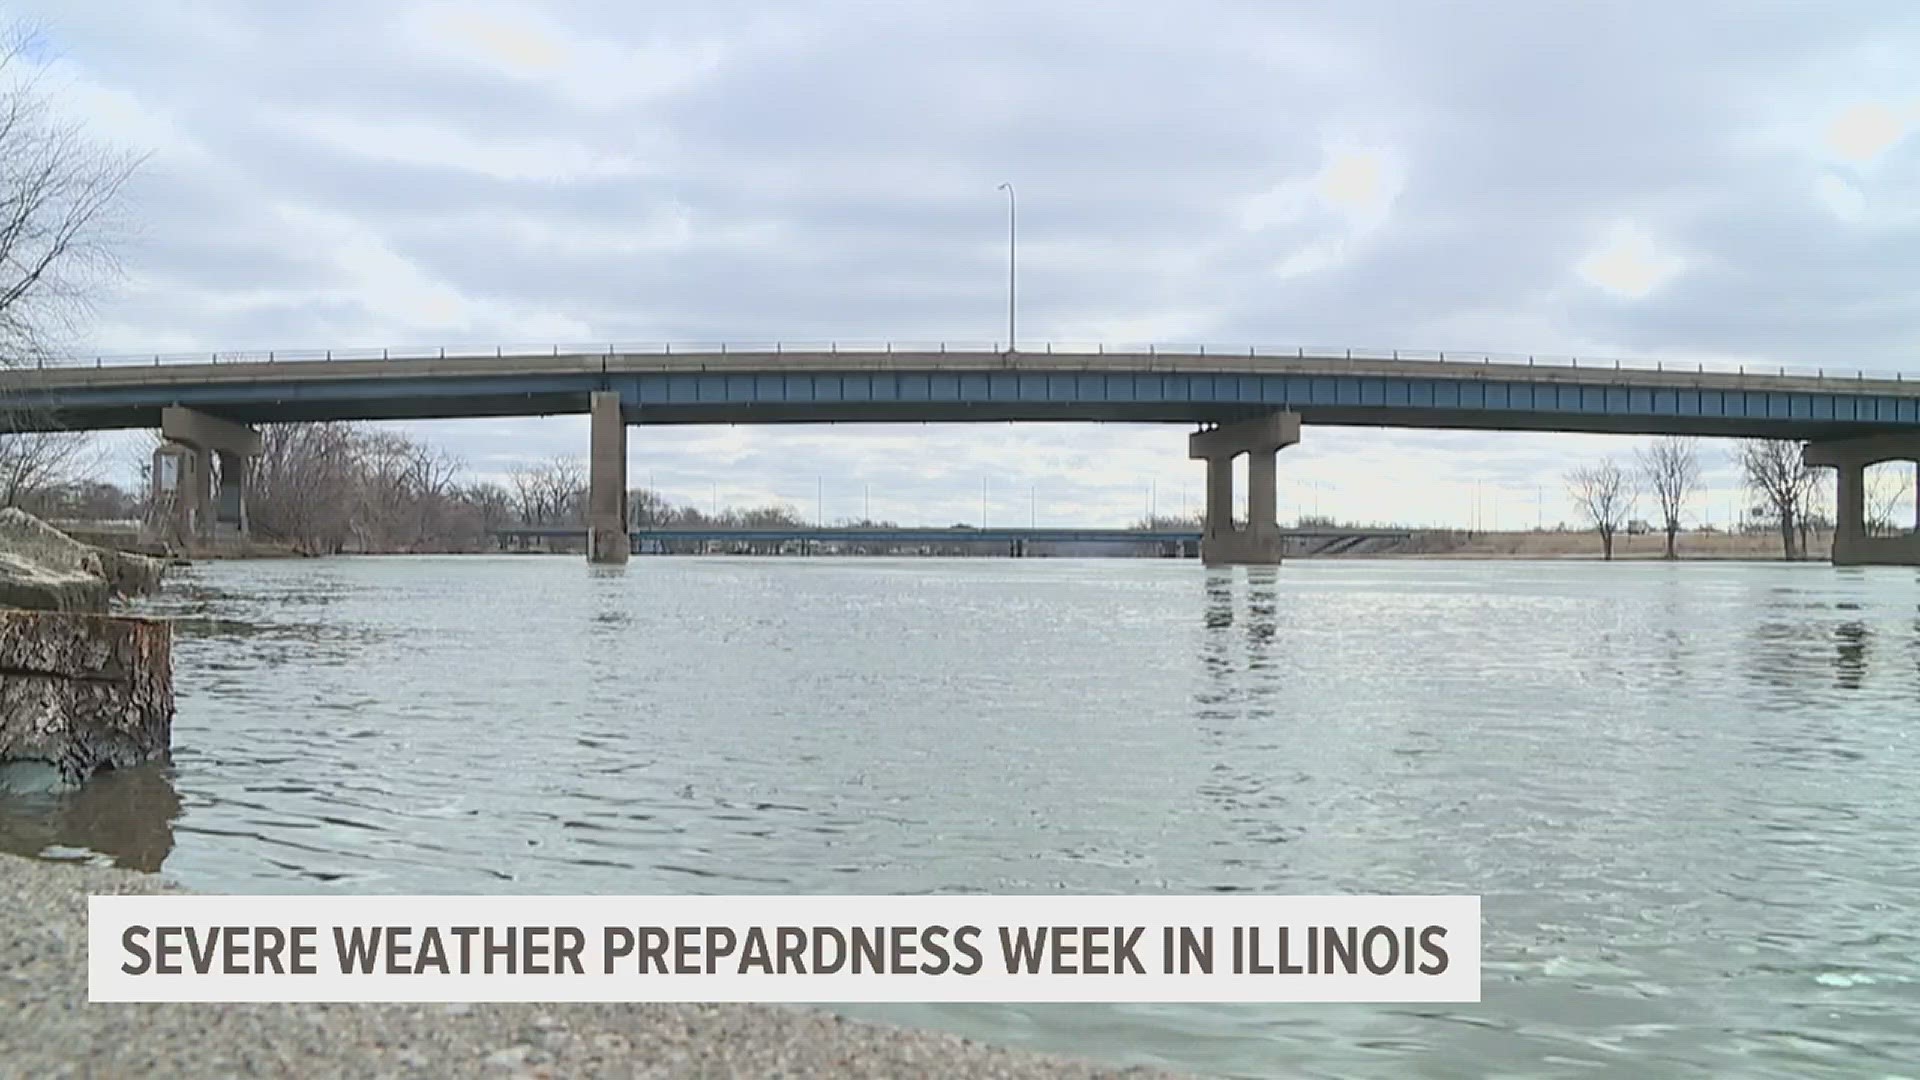 News 8 spoke with the National Weather Service in the Quad Cities, who said 2023 is the year to care about severe weather preparation.